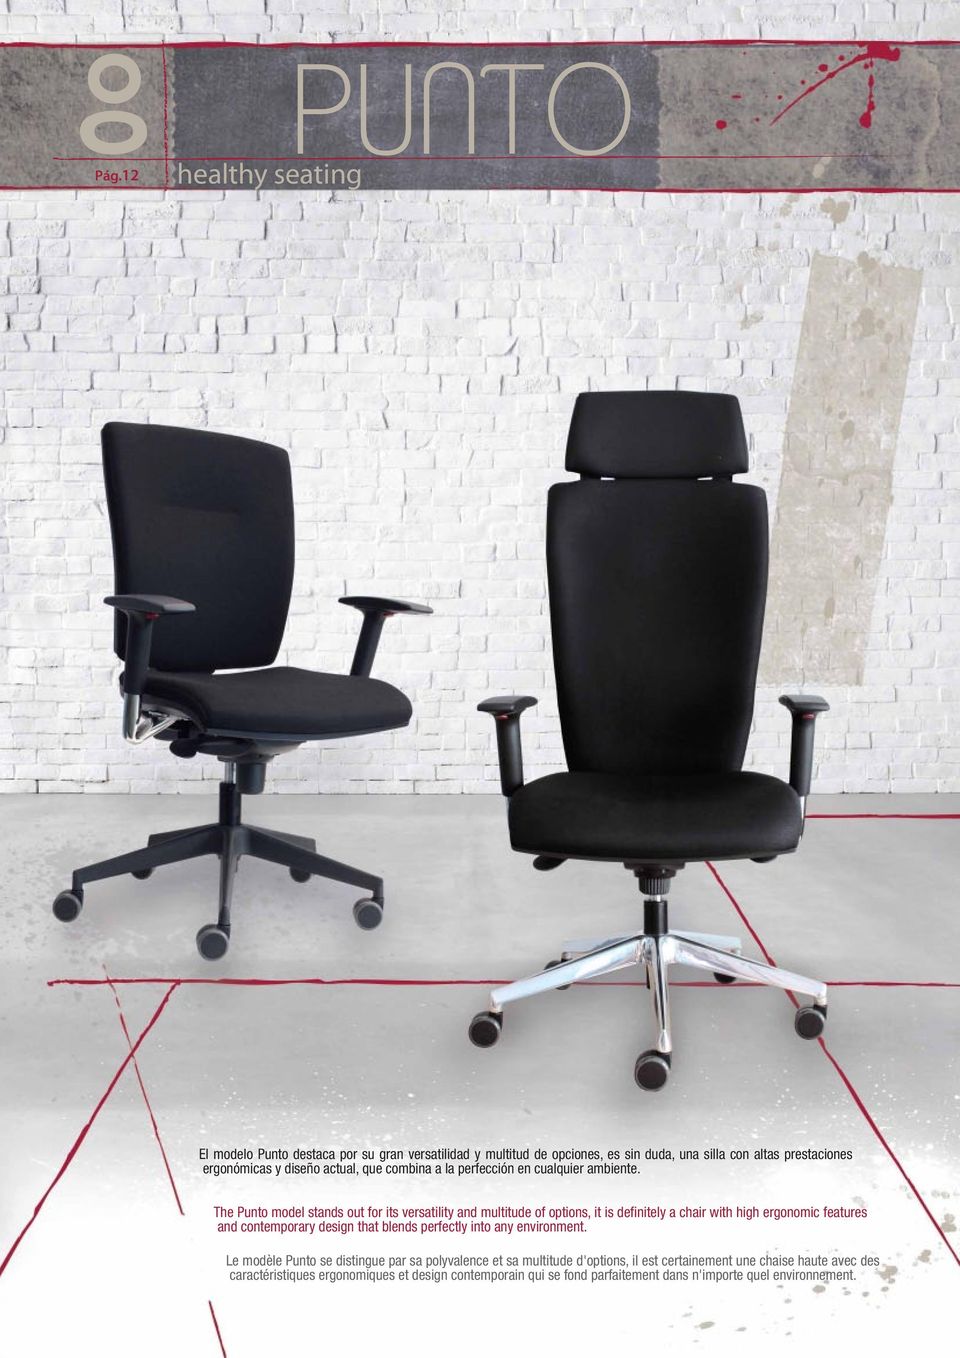 The Punto model stands out for its versatility and multitude of options, it is definitely a chair with high ergonomic features and contemporary design that blends